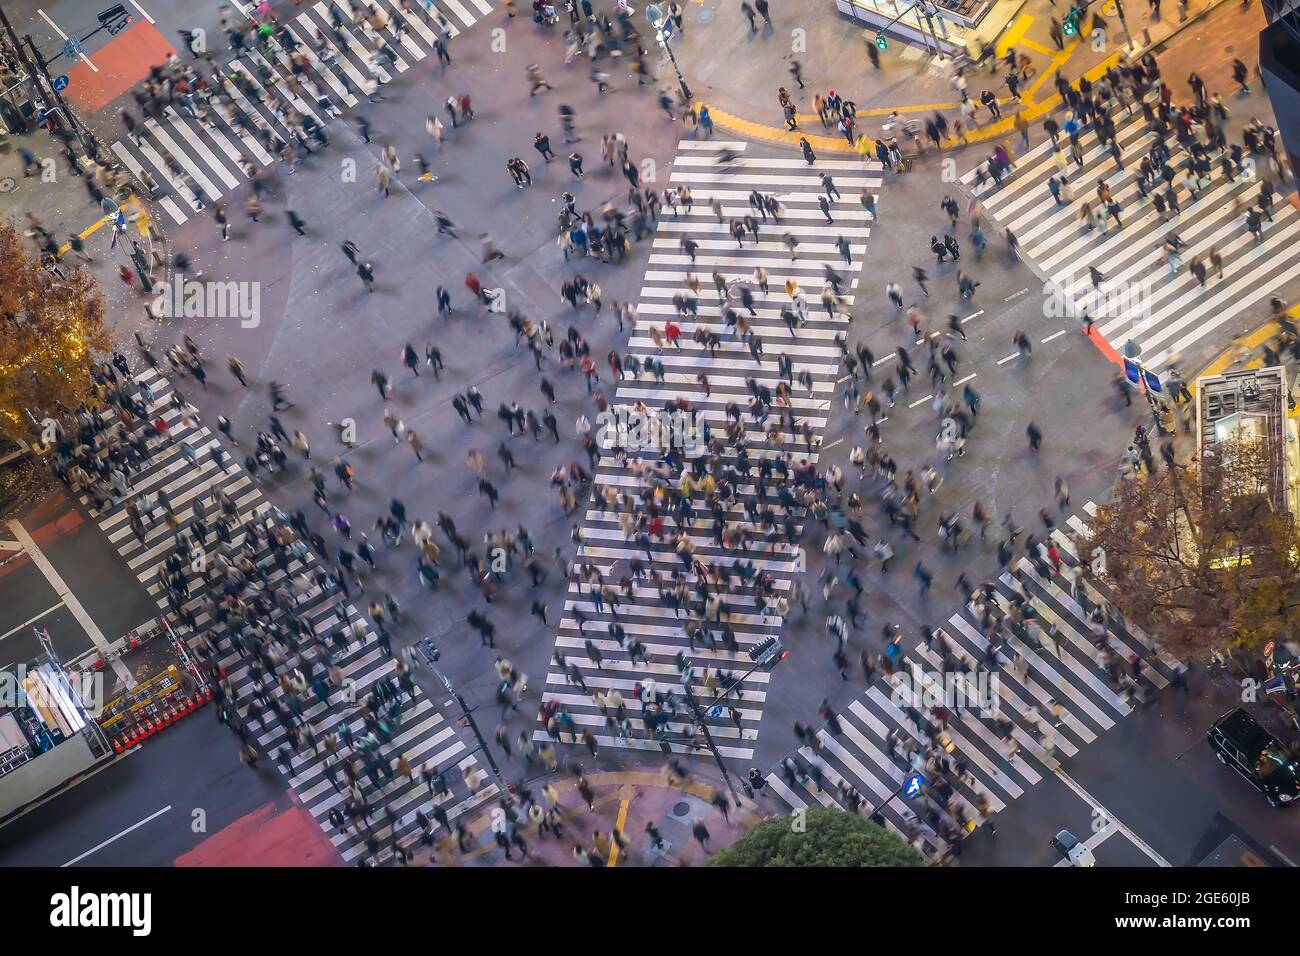 Shibuya Crossing from top view at night in Tokyo, Japan (slow shutter speed blur effect) Stock Photo